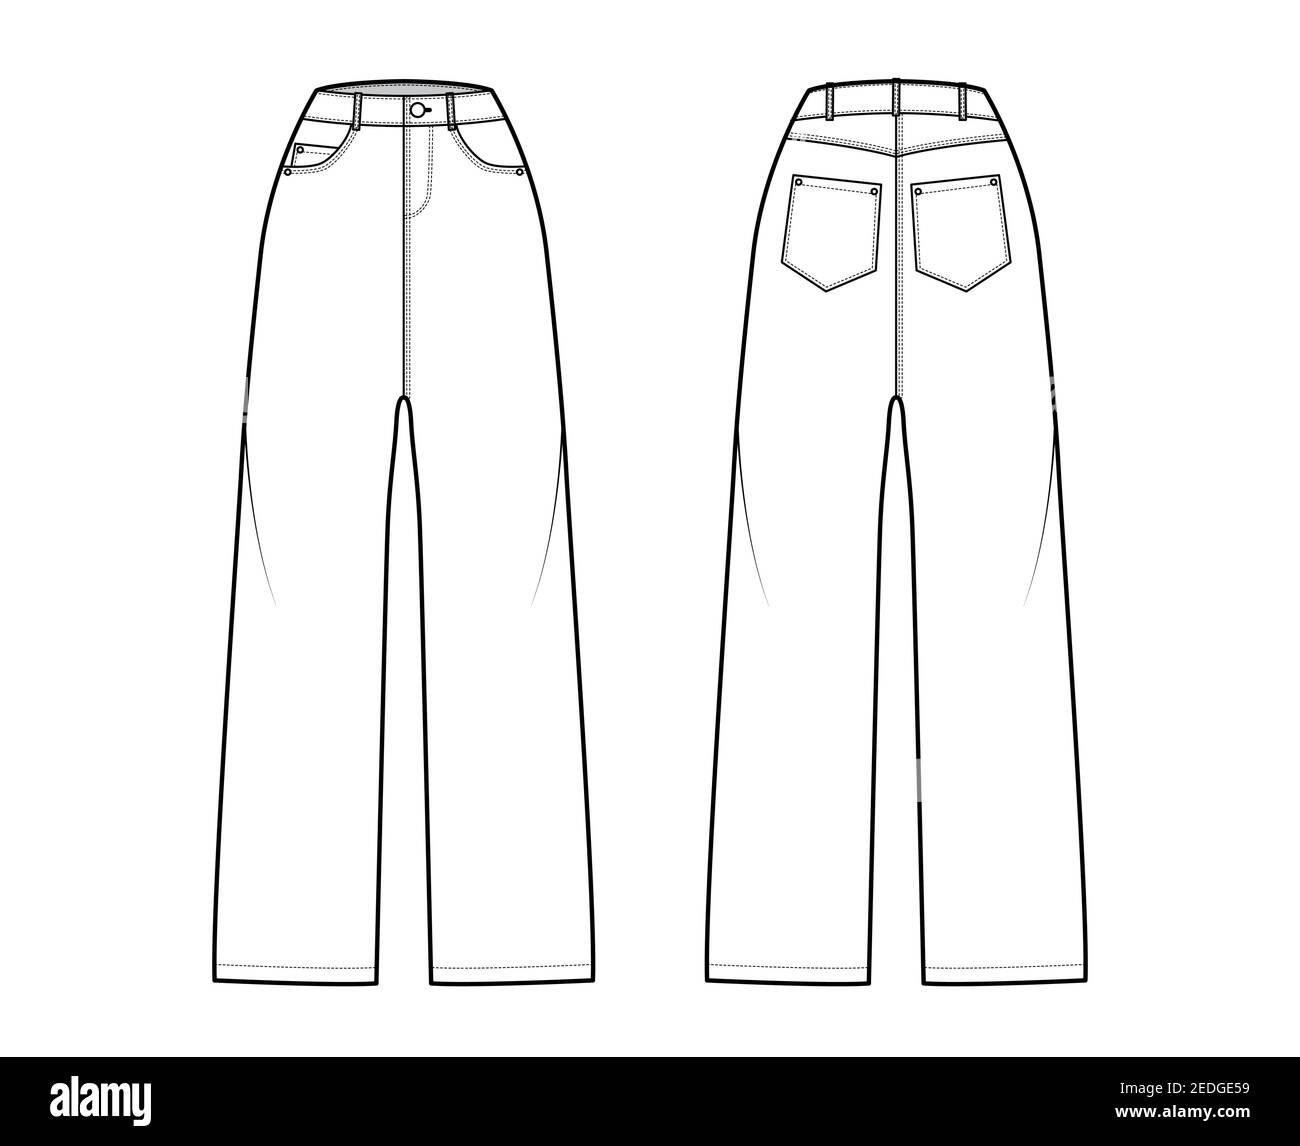 Baggy Jeans Denim pants technical fashion illustration with full length,  normal waist, high rise, 5 pockets,